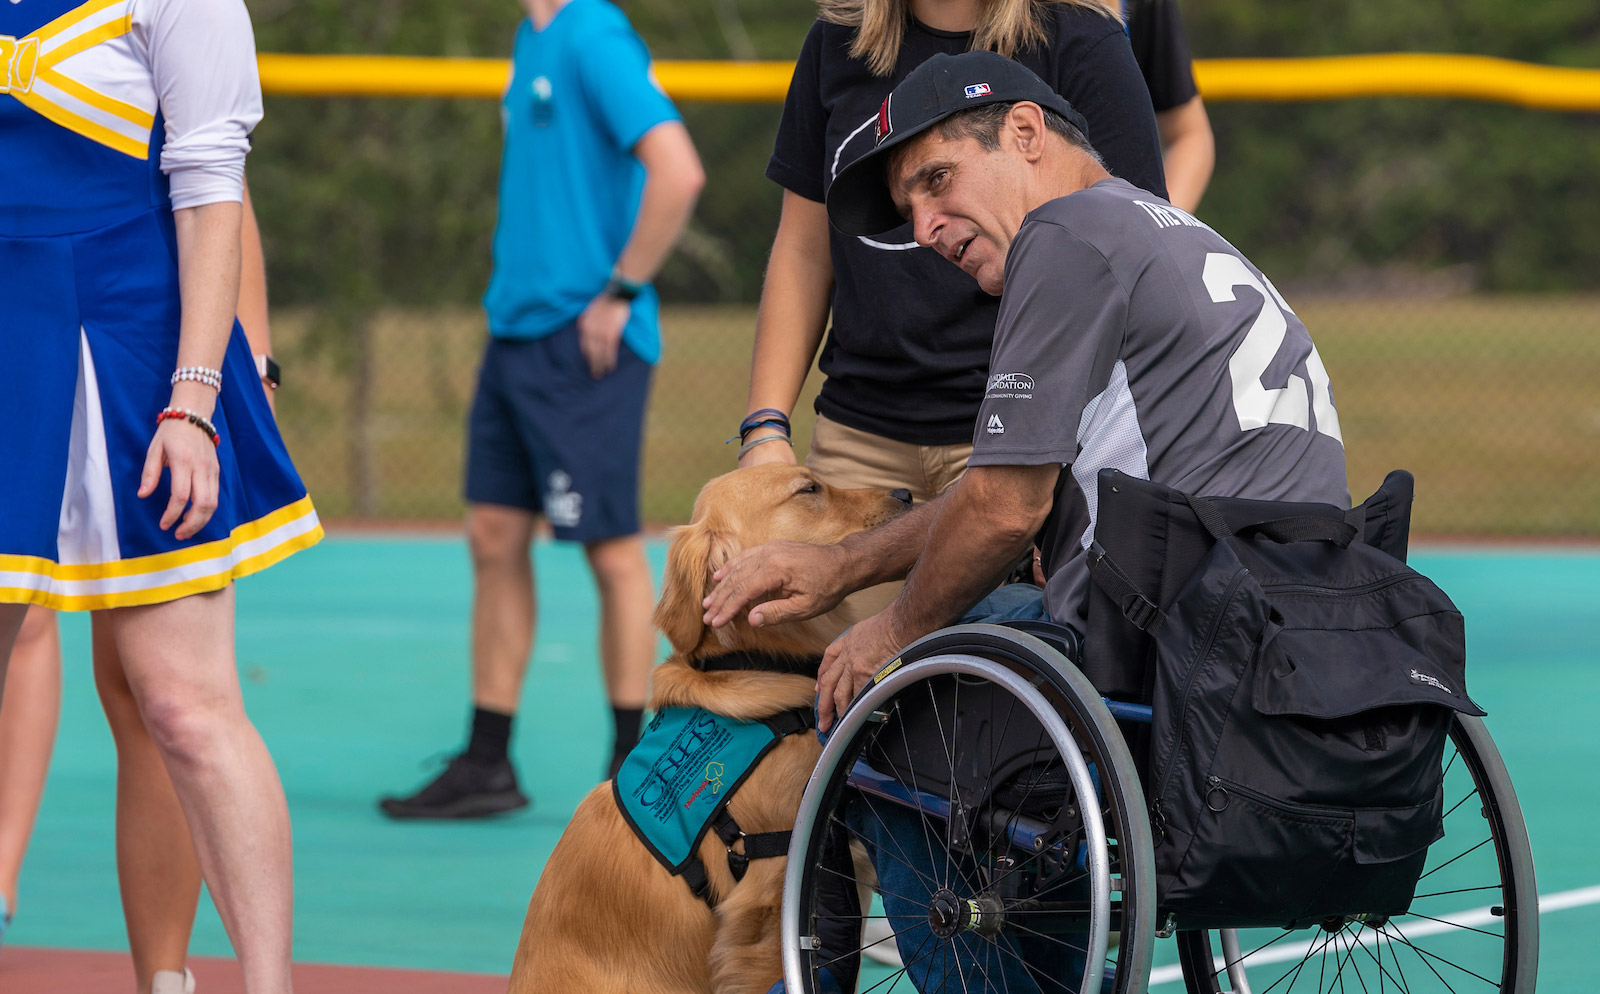 Service dog assists athlete in wheelchair